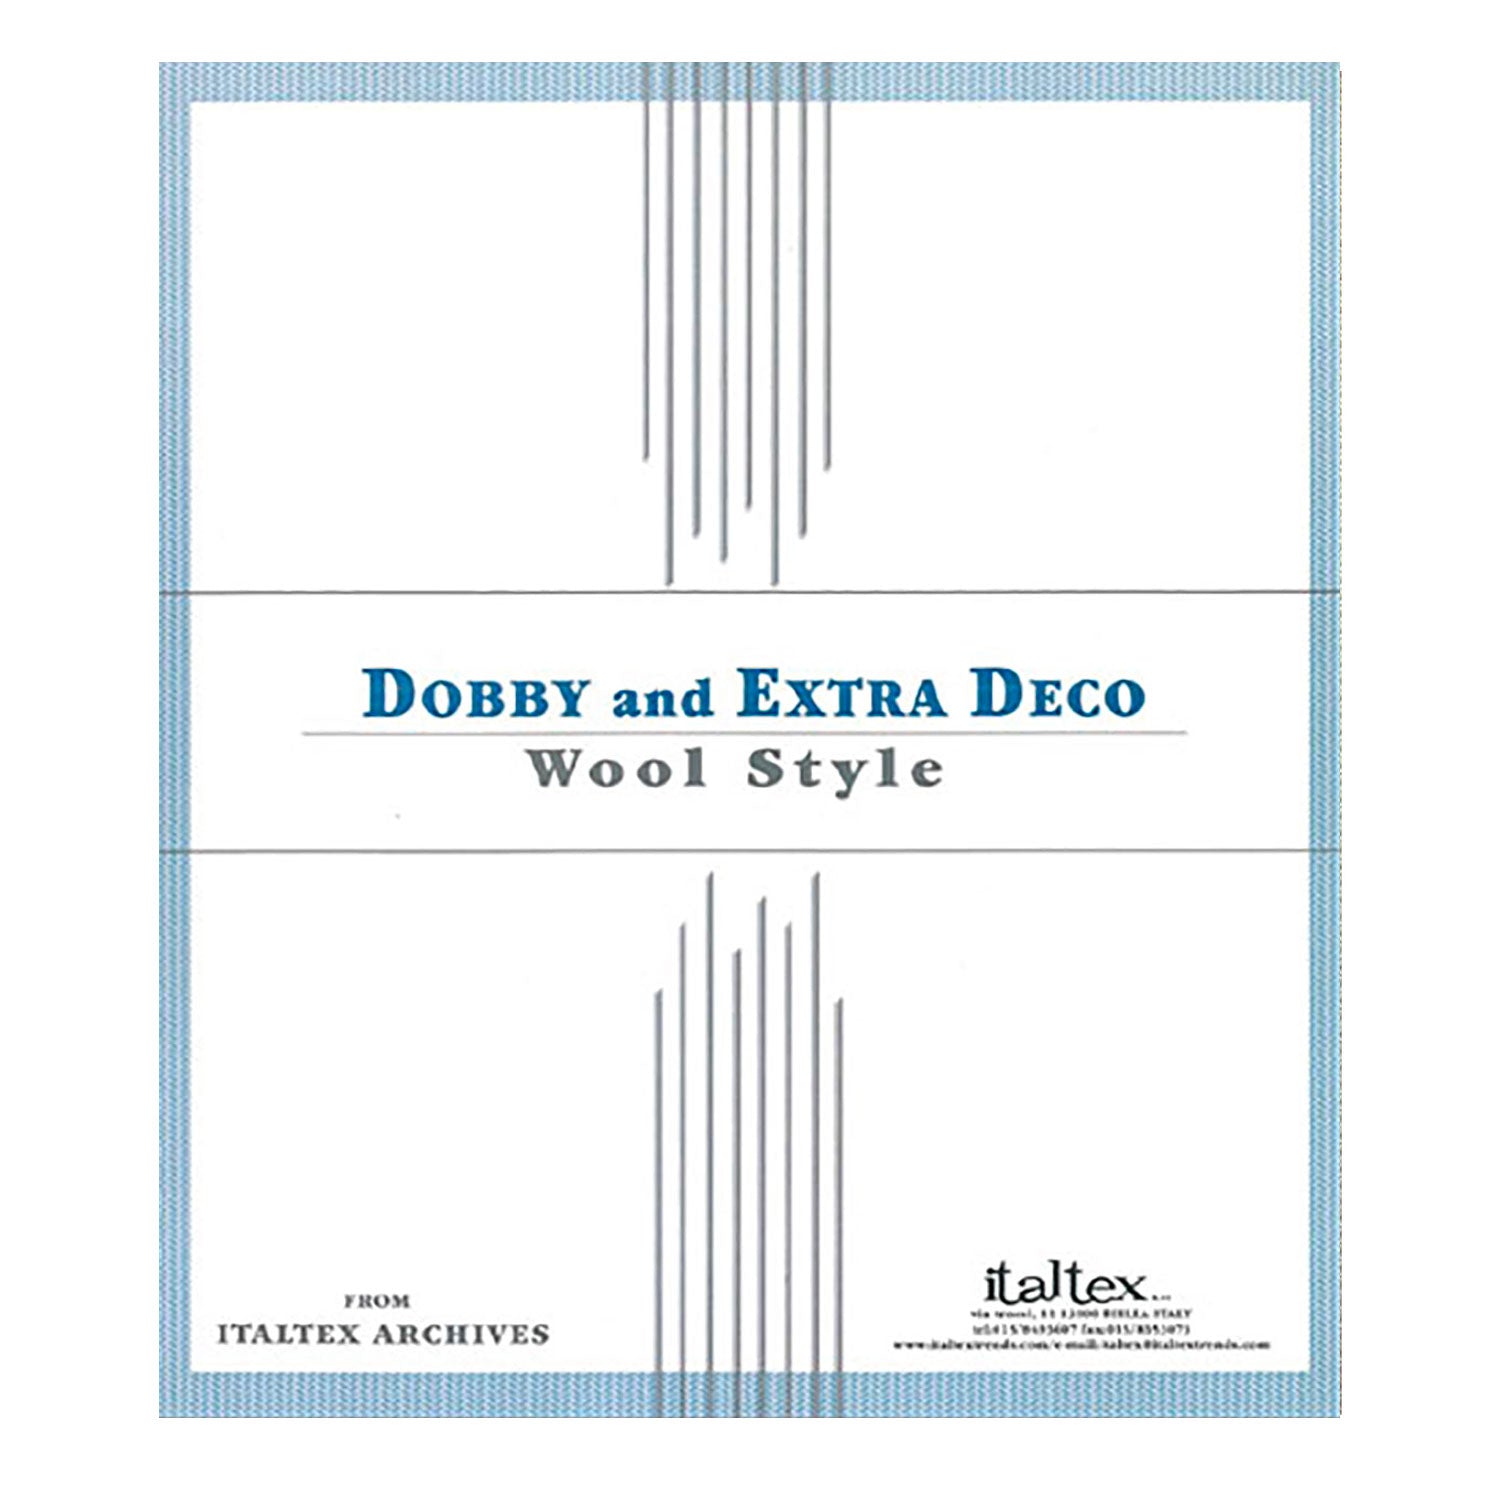 DOBBY and EXTRA DECO (wool style) Vol 1